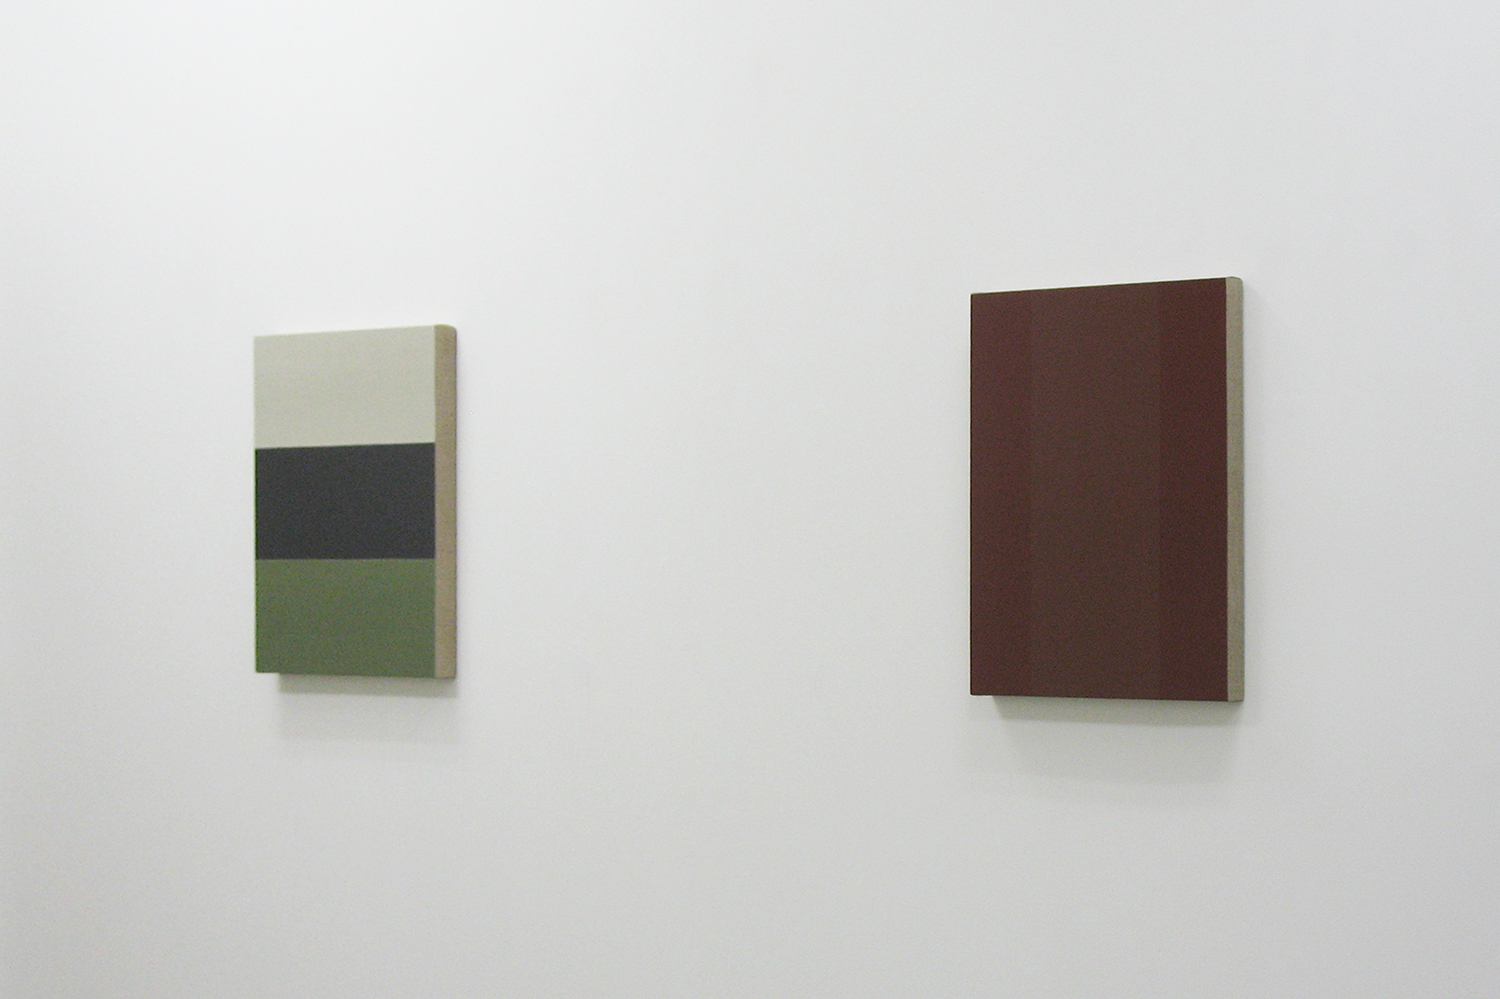 TS0818(left) |Gesso on linen on panel｜45 x 45 cm｜2008<br>TS0902(right) ｜Gesso on linen on panel｜45 x 45 cm｜2009